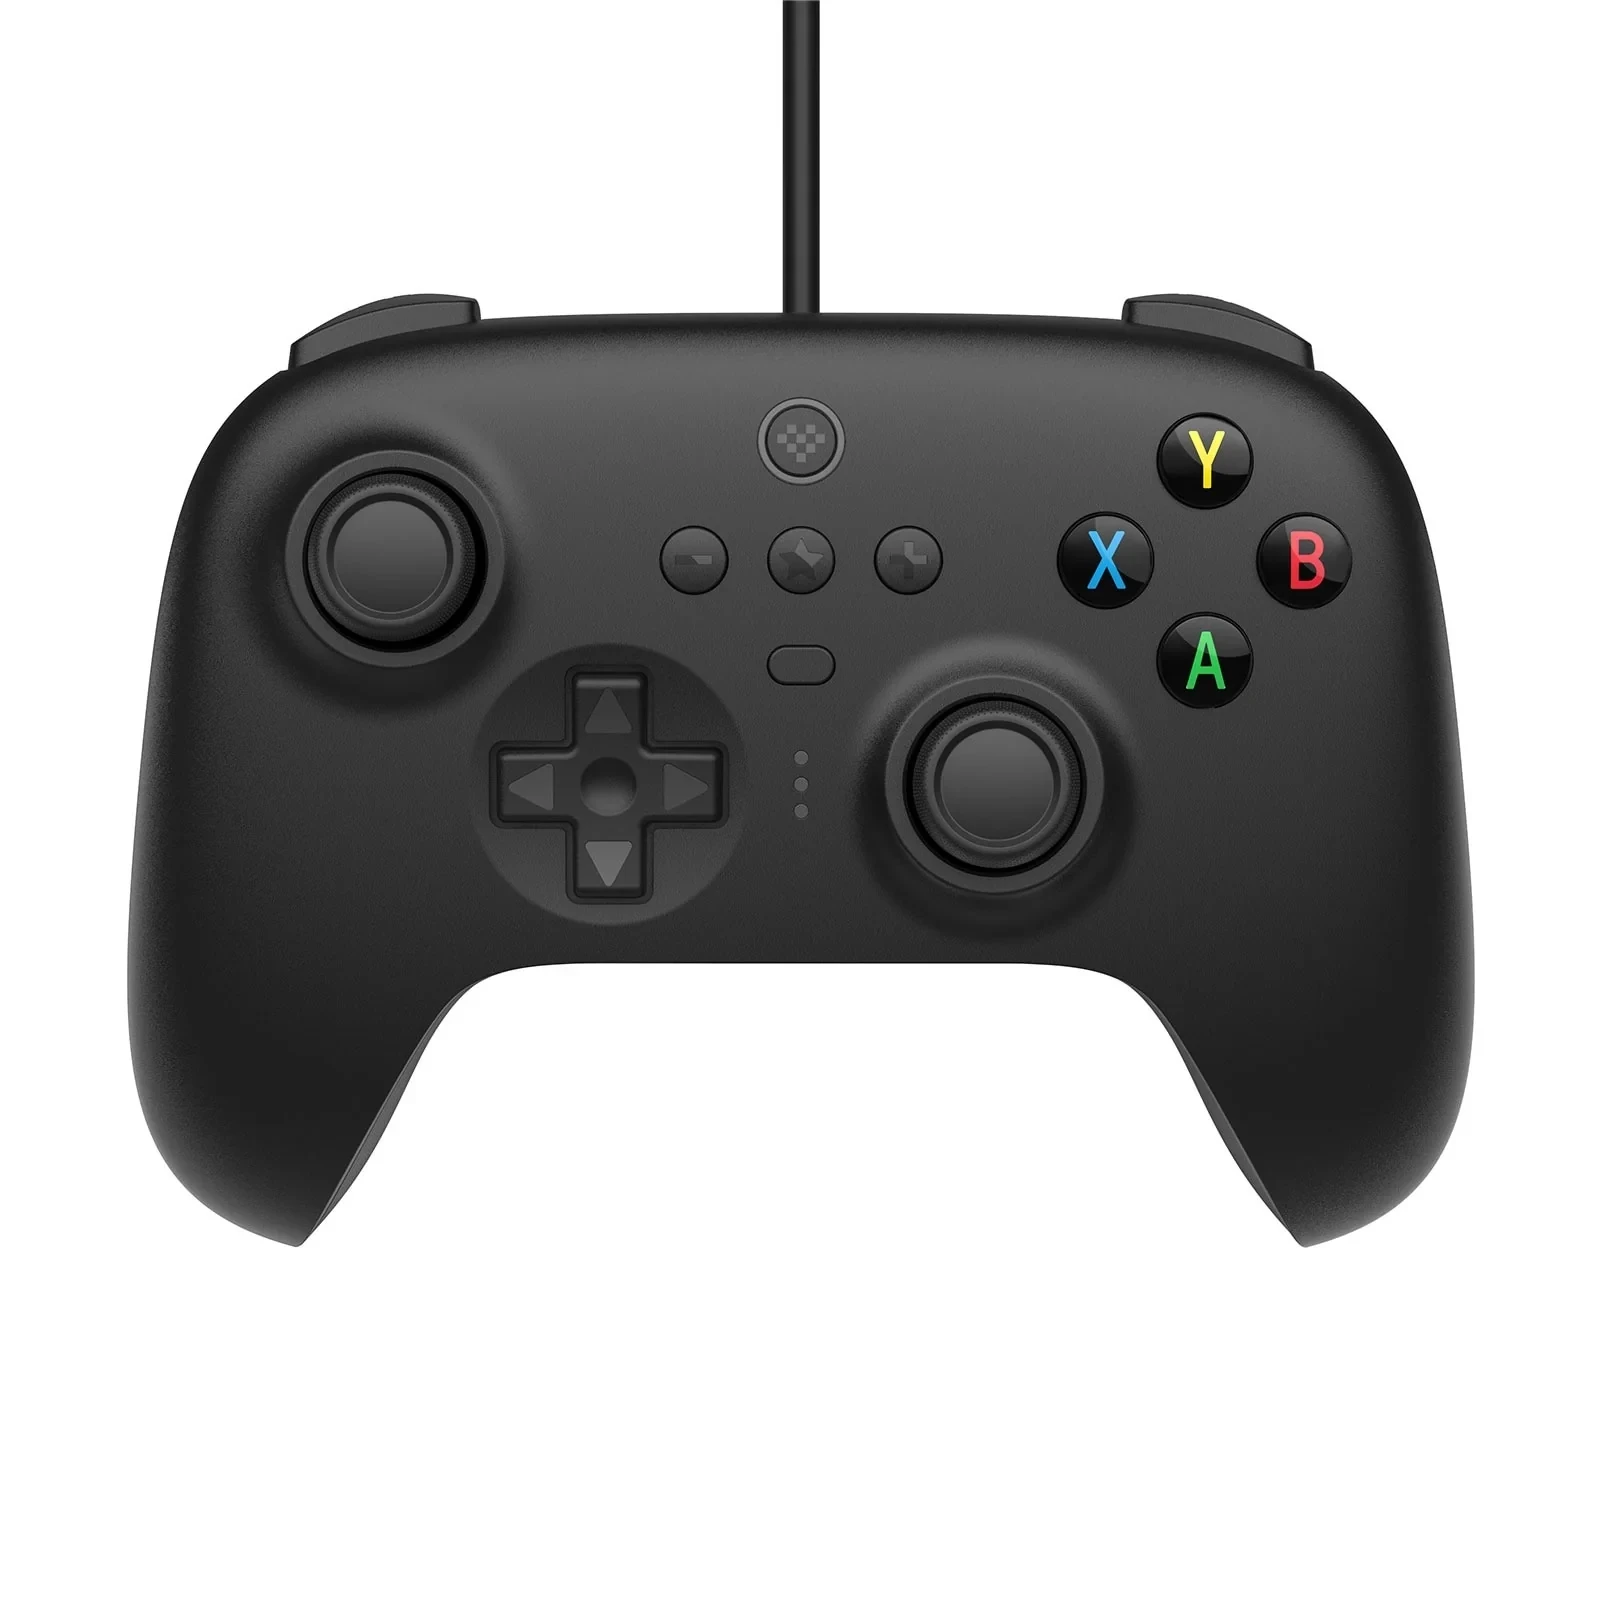  8BitDo Switch Ultimate Wired Controller for Windows